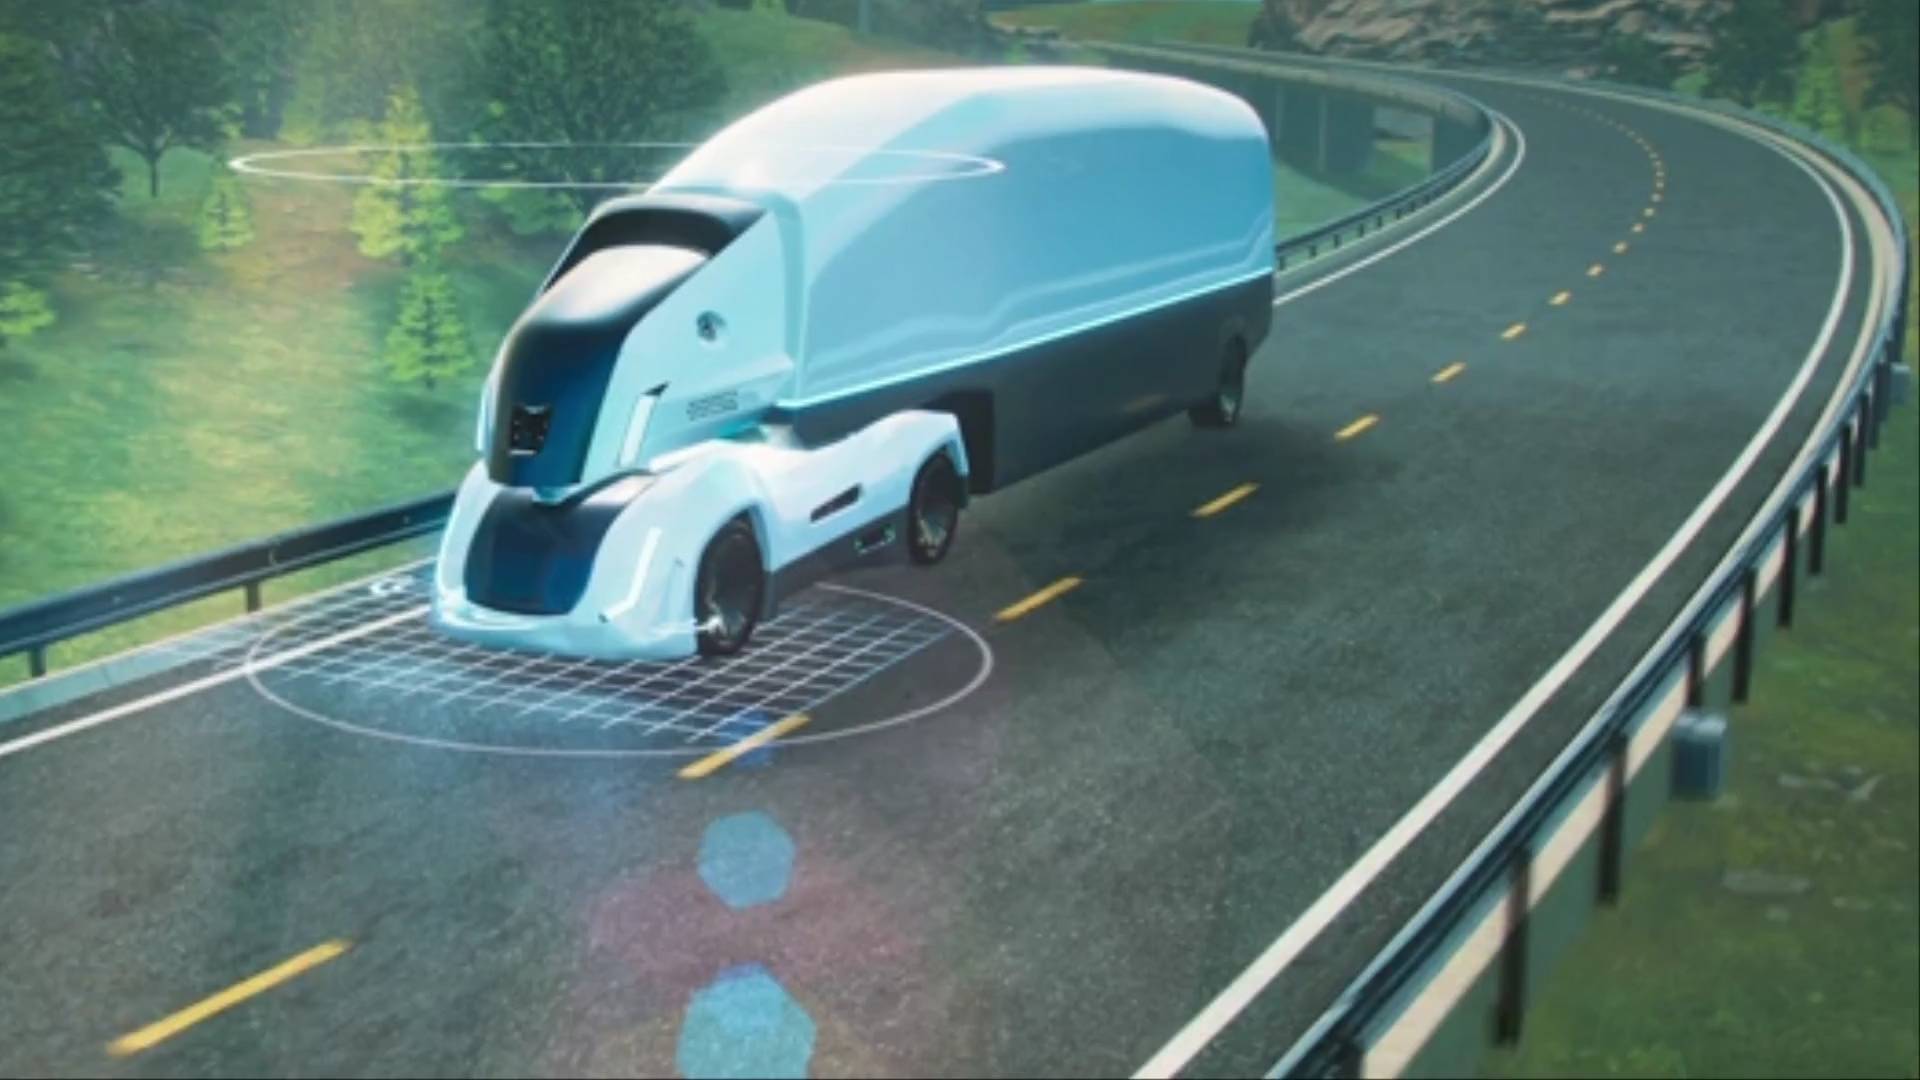 Study Suggests Self-Driving Trucks Could Replace 500,000 U.S. Jobs